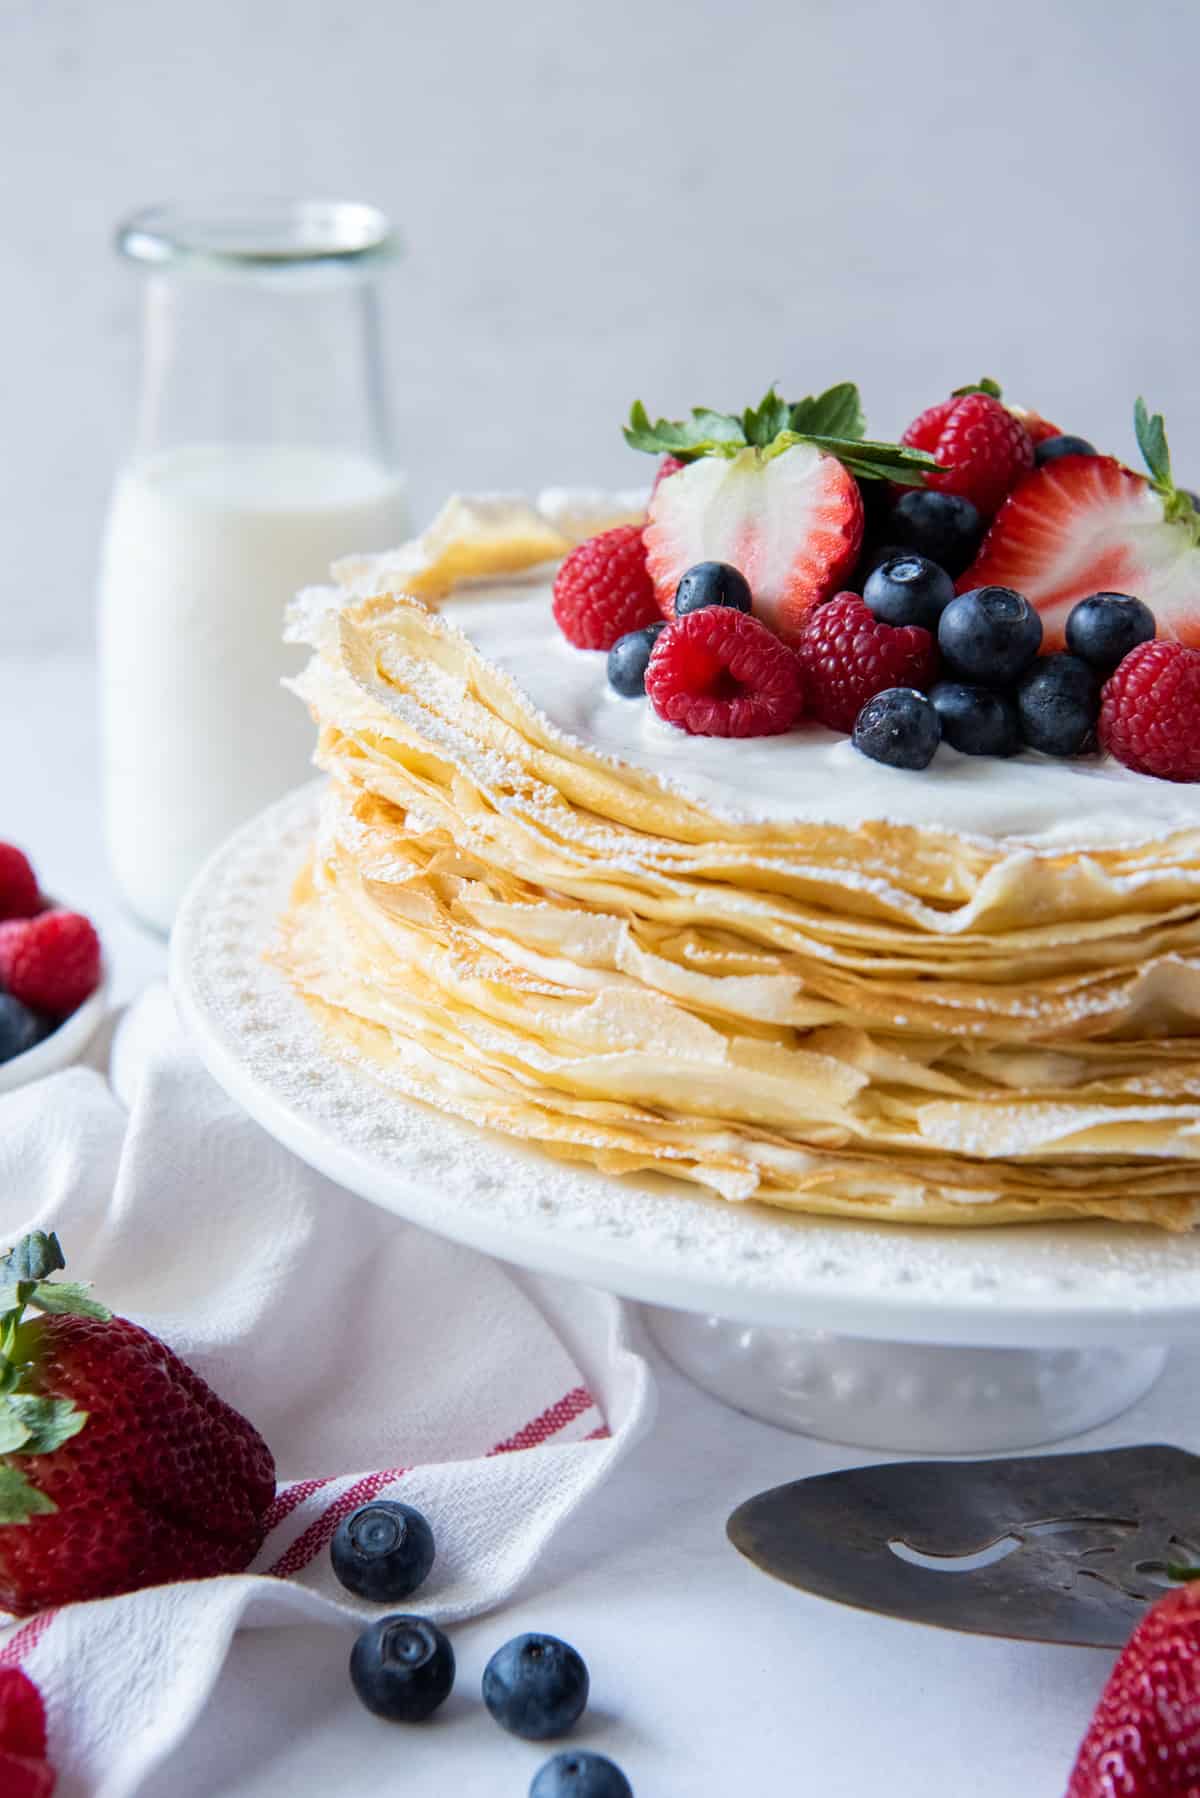 Crepe Cake with Berries on a White Plate